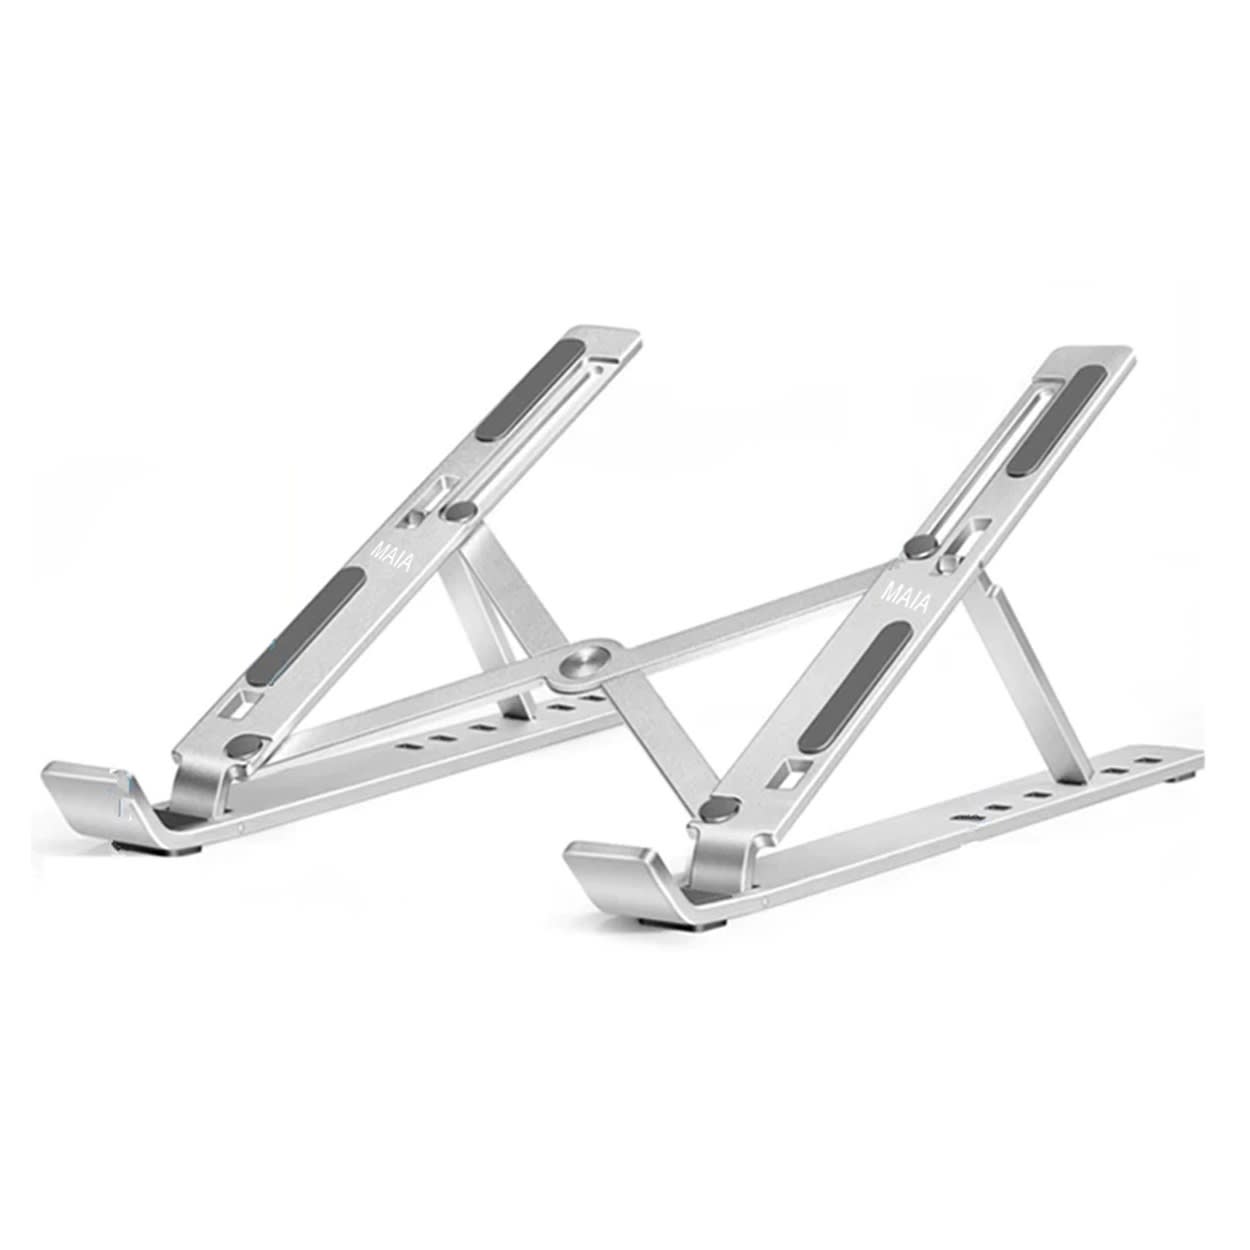 MAIA Aluminium Alloy Tablet Stand Bracket Laptop Stand_1